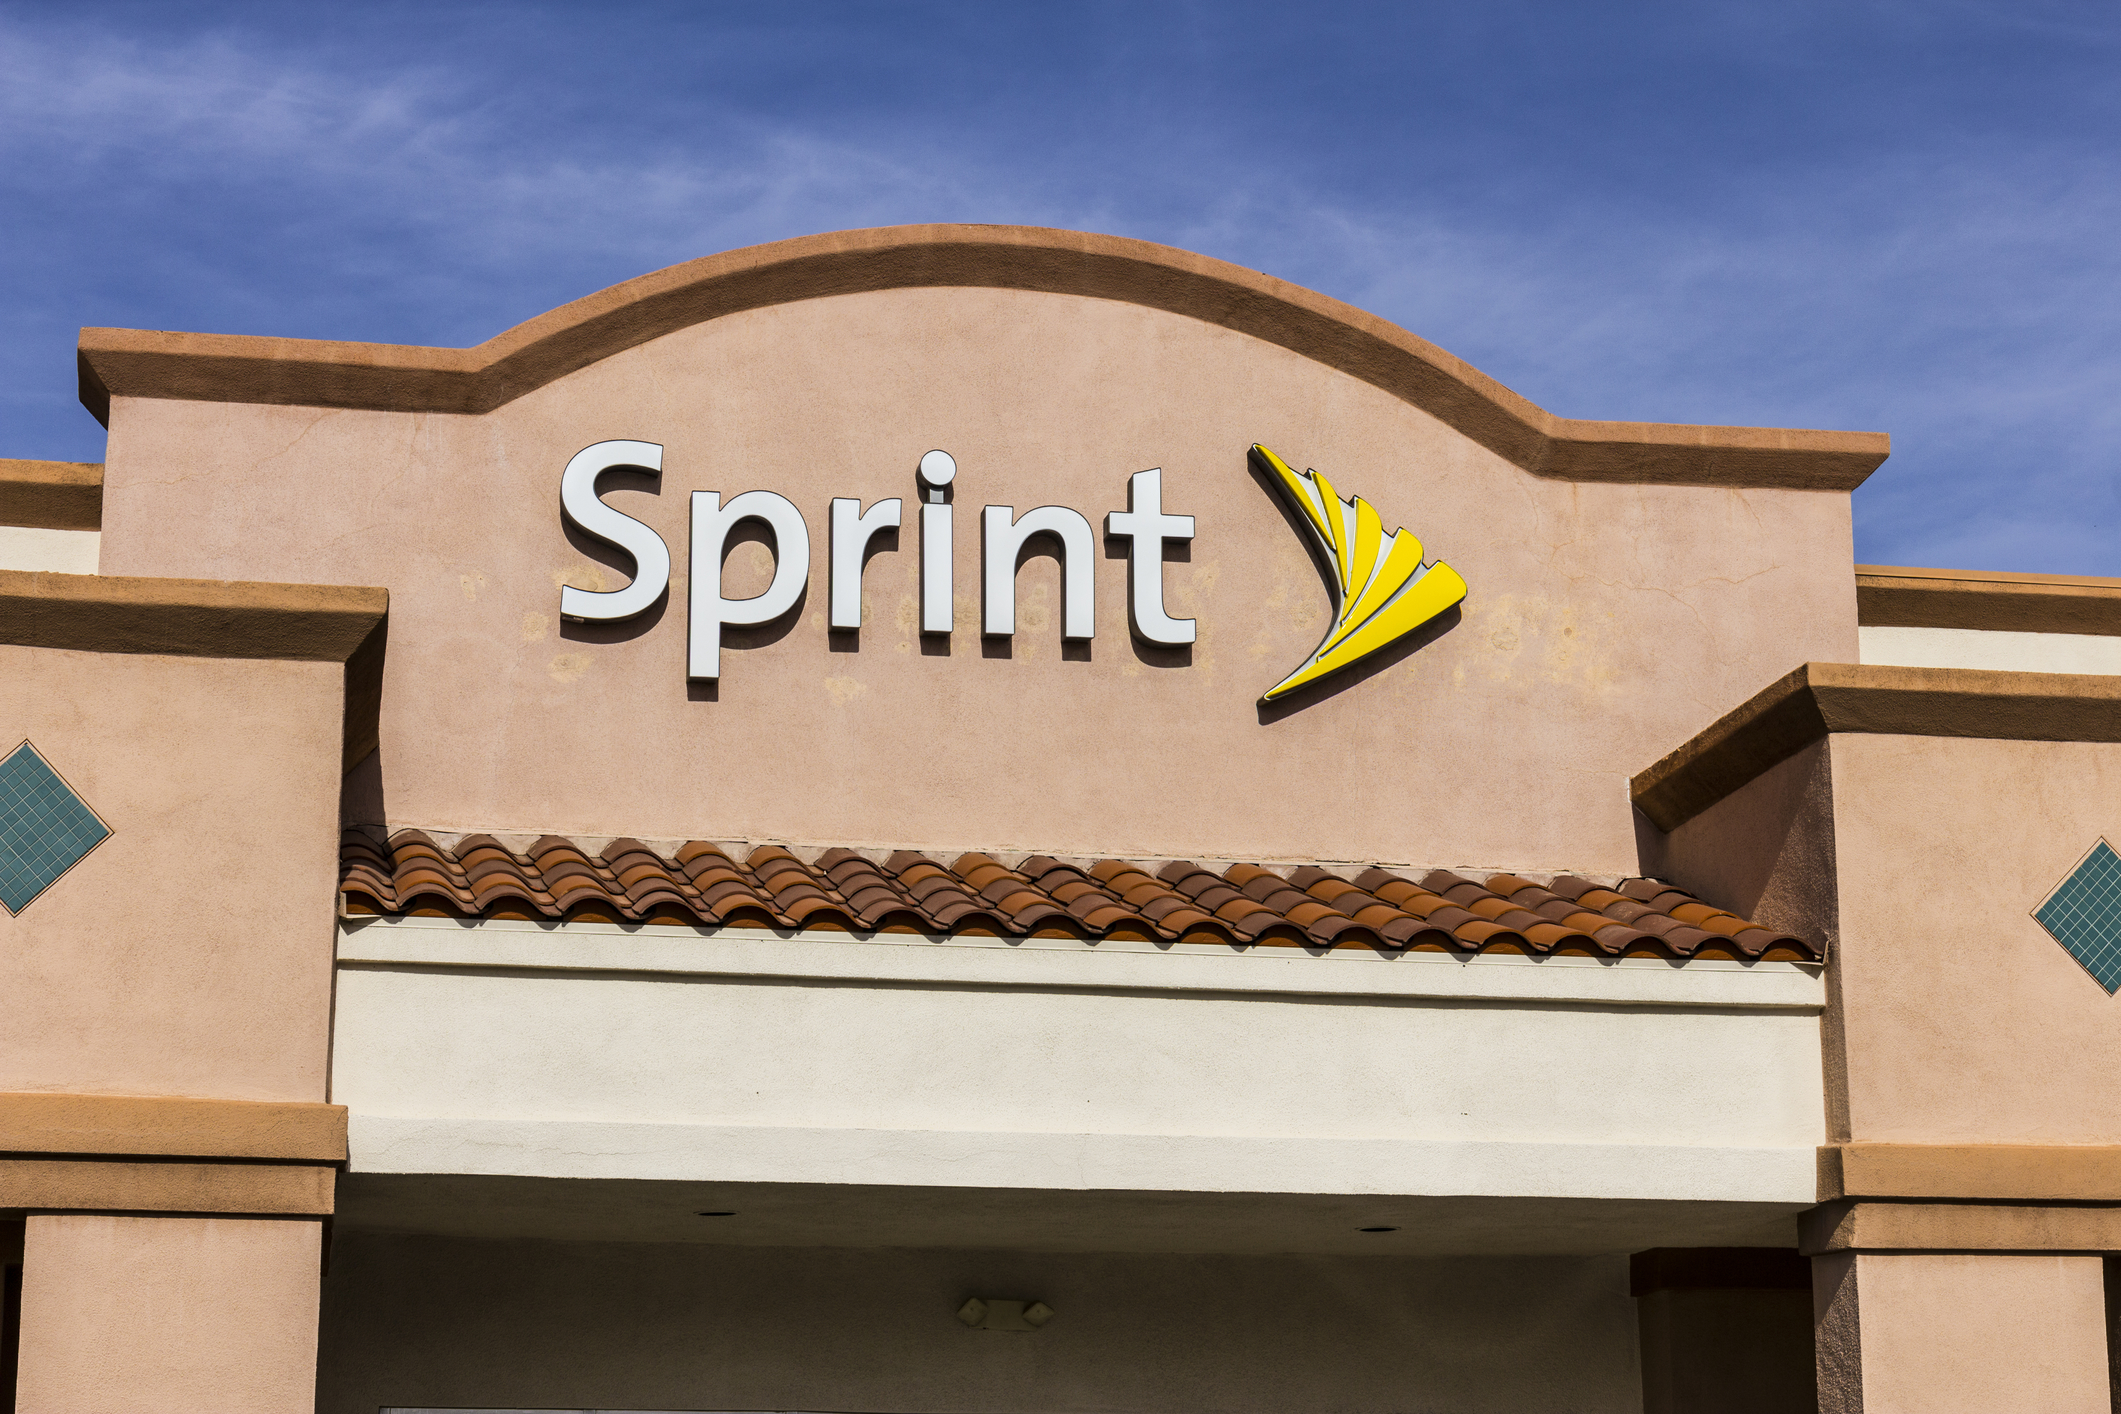 Sprint deal: Get a FREE year of unlimited service with Sprint!